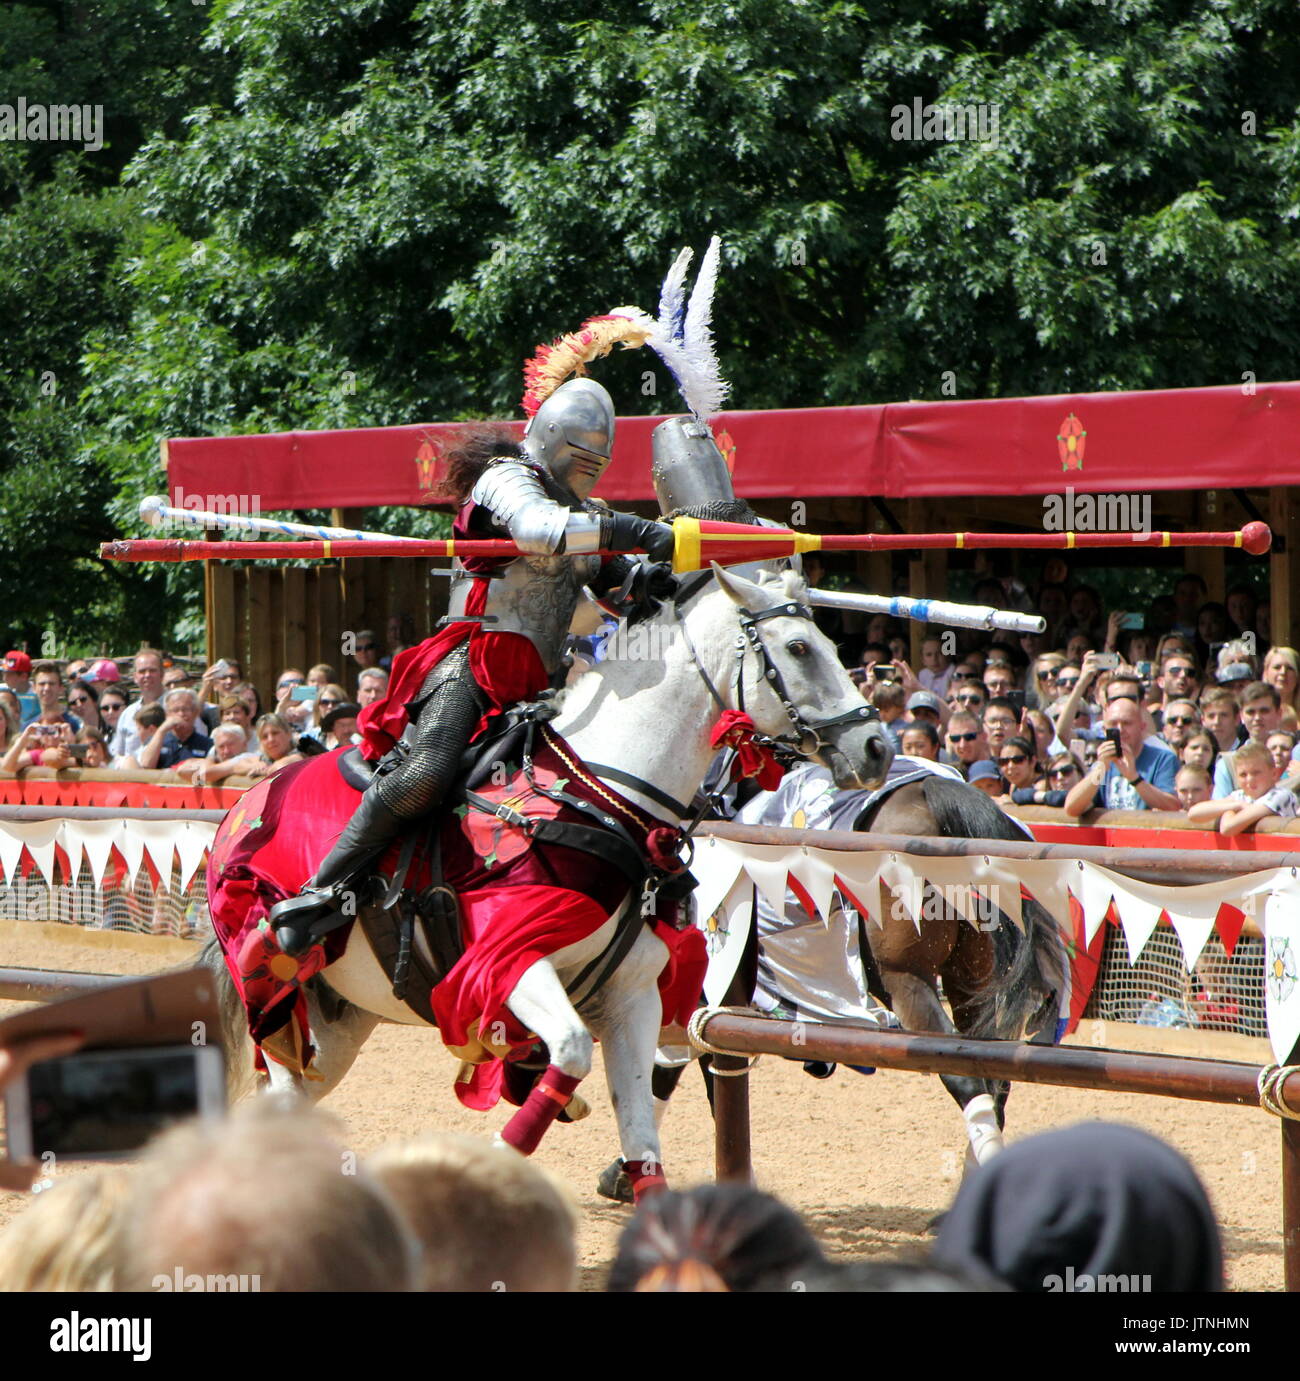 Jousting tournament and medieval re-enactment of the Wars of the Roses